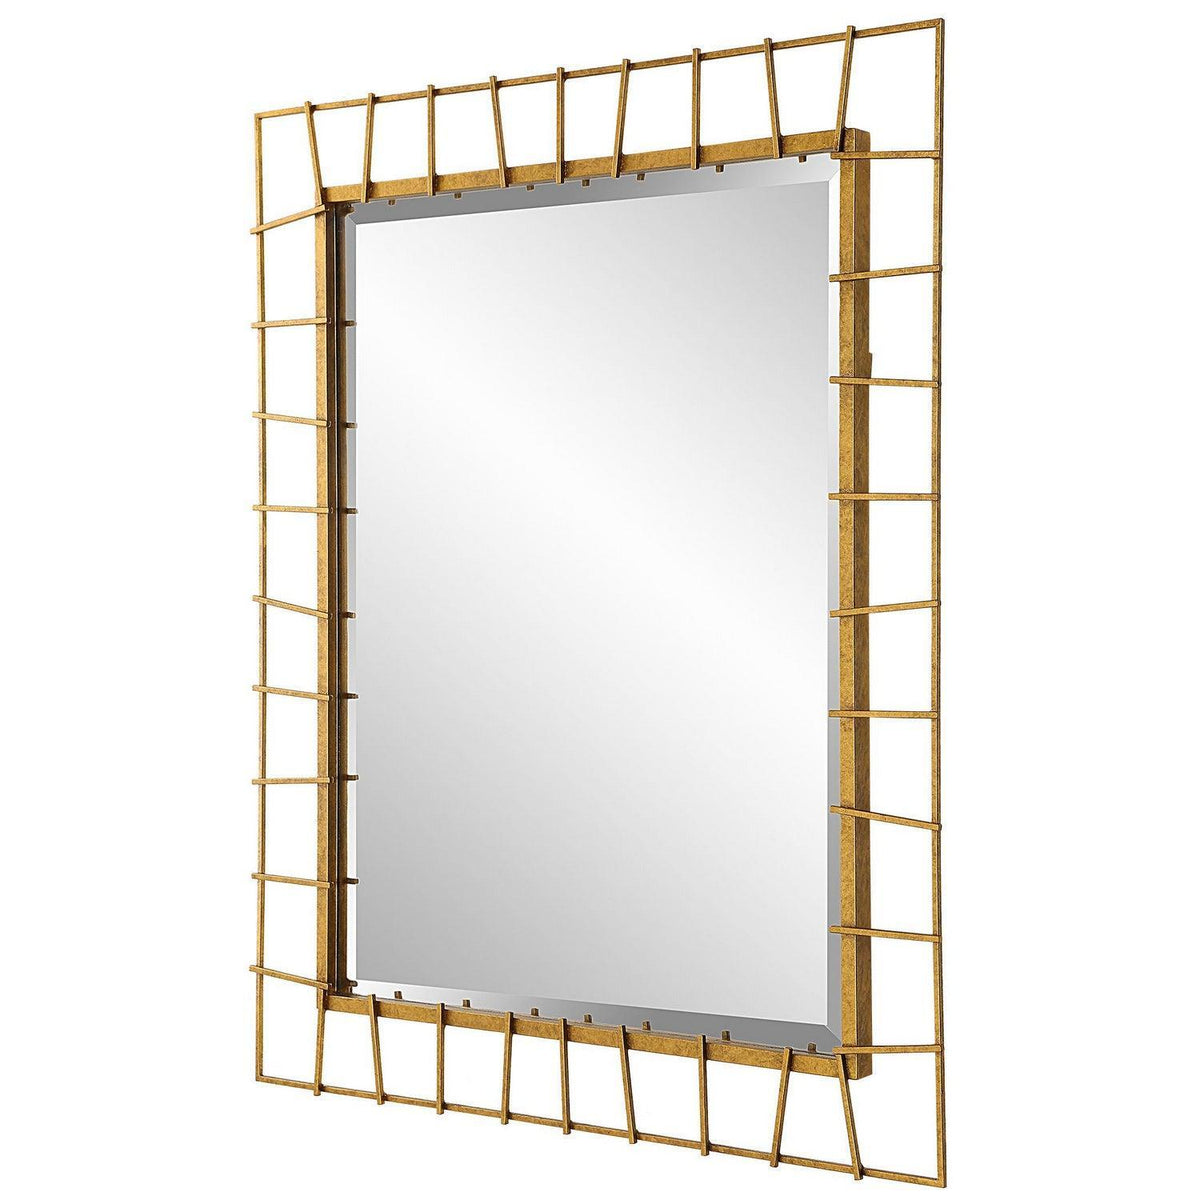 The Uttermost - Townsend Mirror - 09805 | Montreal Lighting & Hardware